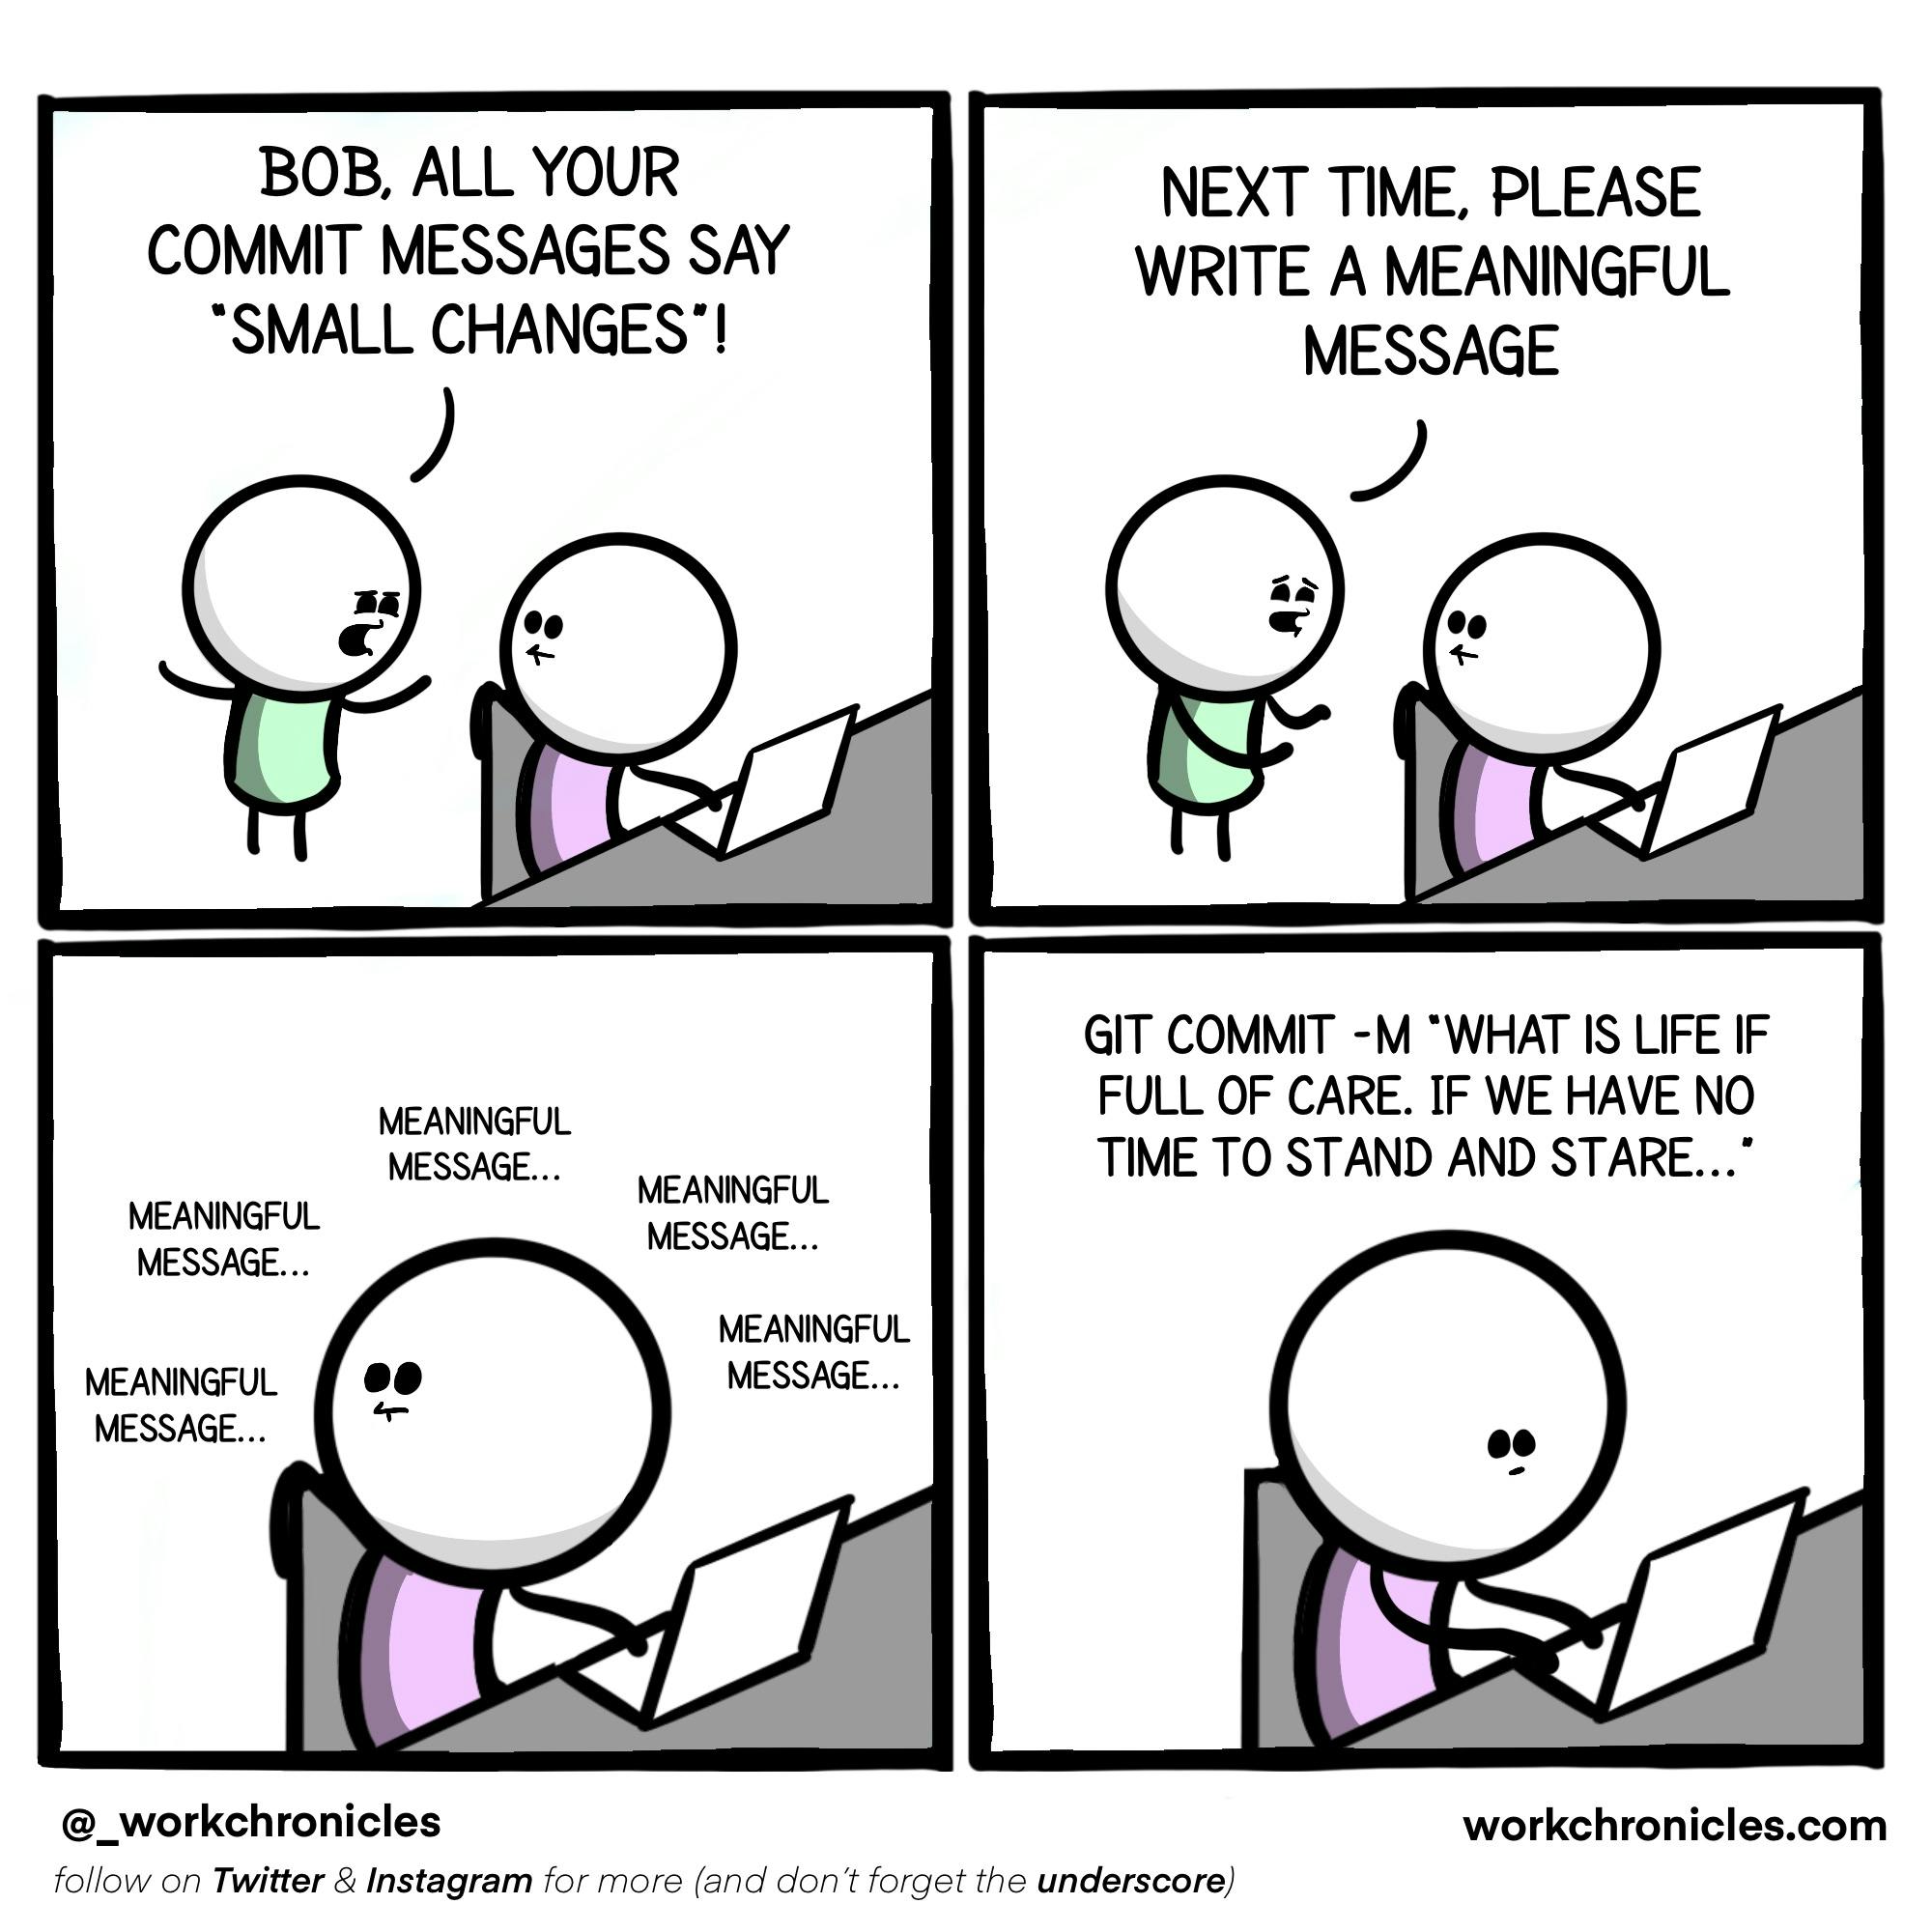 A standing stick figure says to one sitting in front of a computer: "Bob, all your commit messages say 'small changes'! Next time, Please write a meaningful message." Now alone, the programmer thinks "meaningful message..." and then types git commit -m "What is life if full of care. If we have no time to stand and stare..."